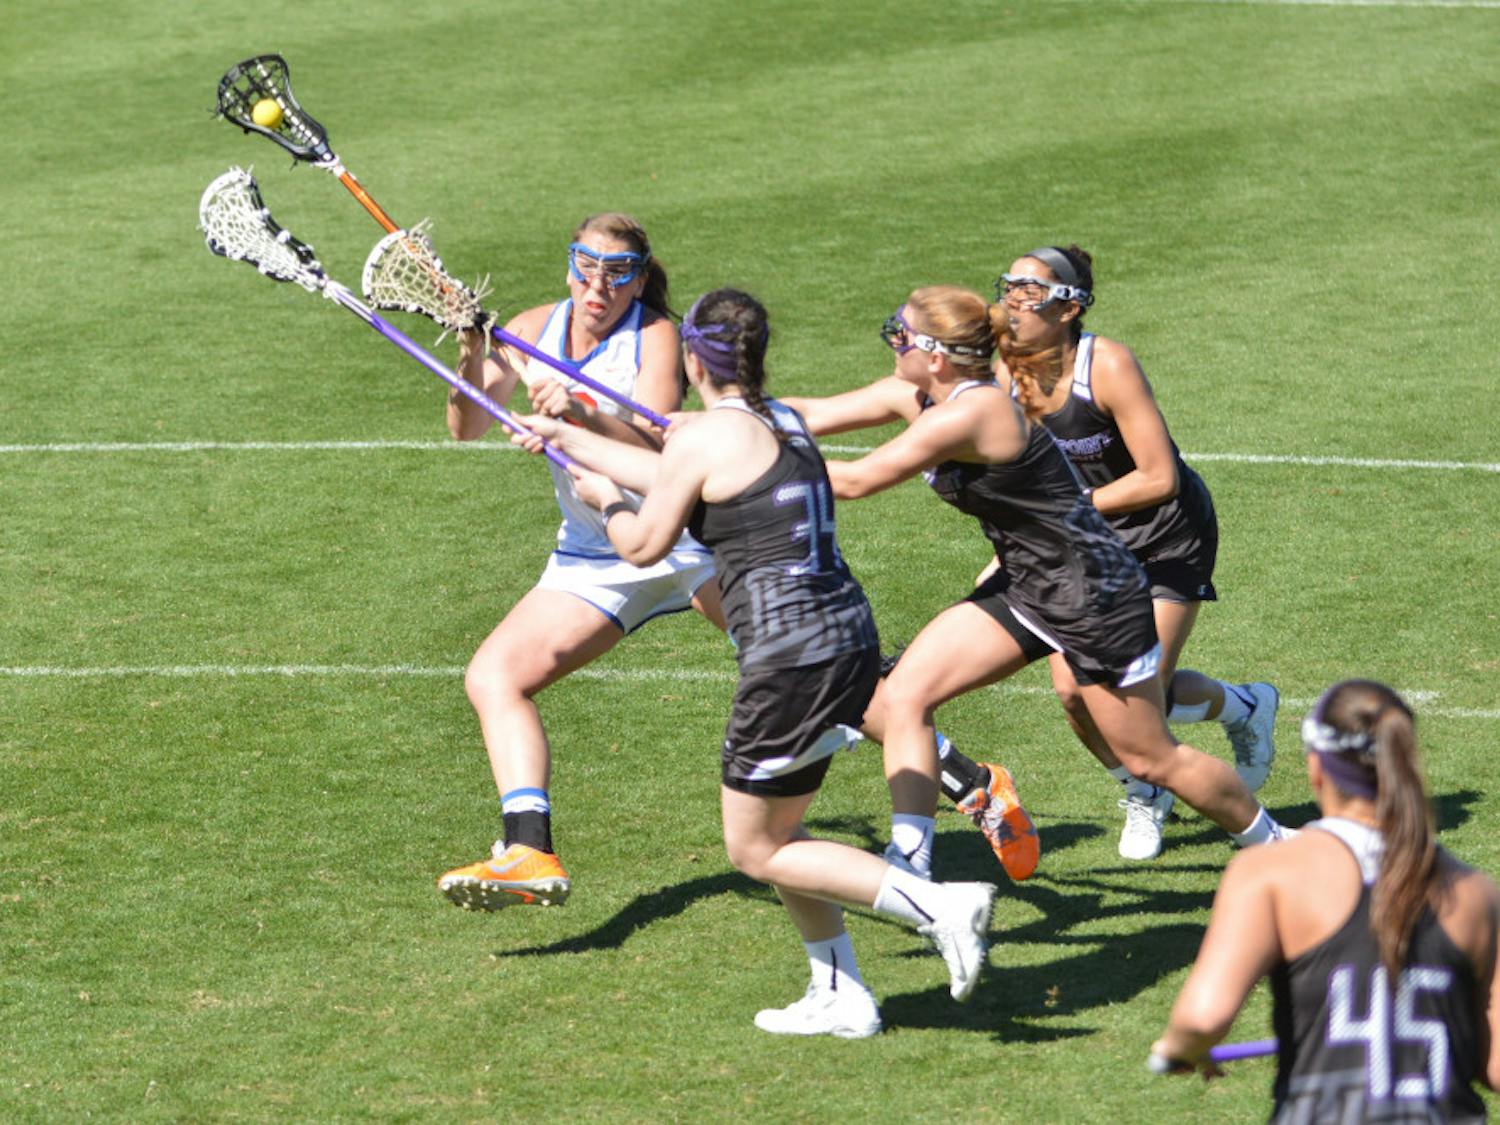 Shannon Gilroy attempts a shot during Florida's 18-7 win against High Point on Saturday in Donald R. Dizney Stadium. The junior midfielder set UF single-game records for draw controls (10), goals (8) and shots (13) against the Panthers.